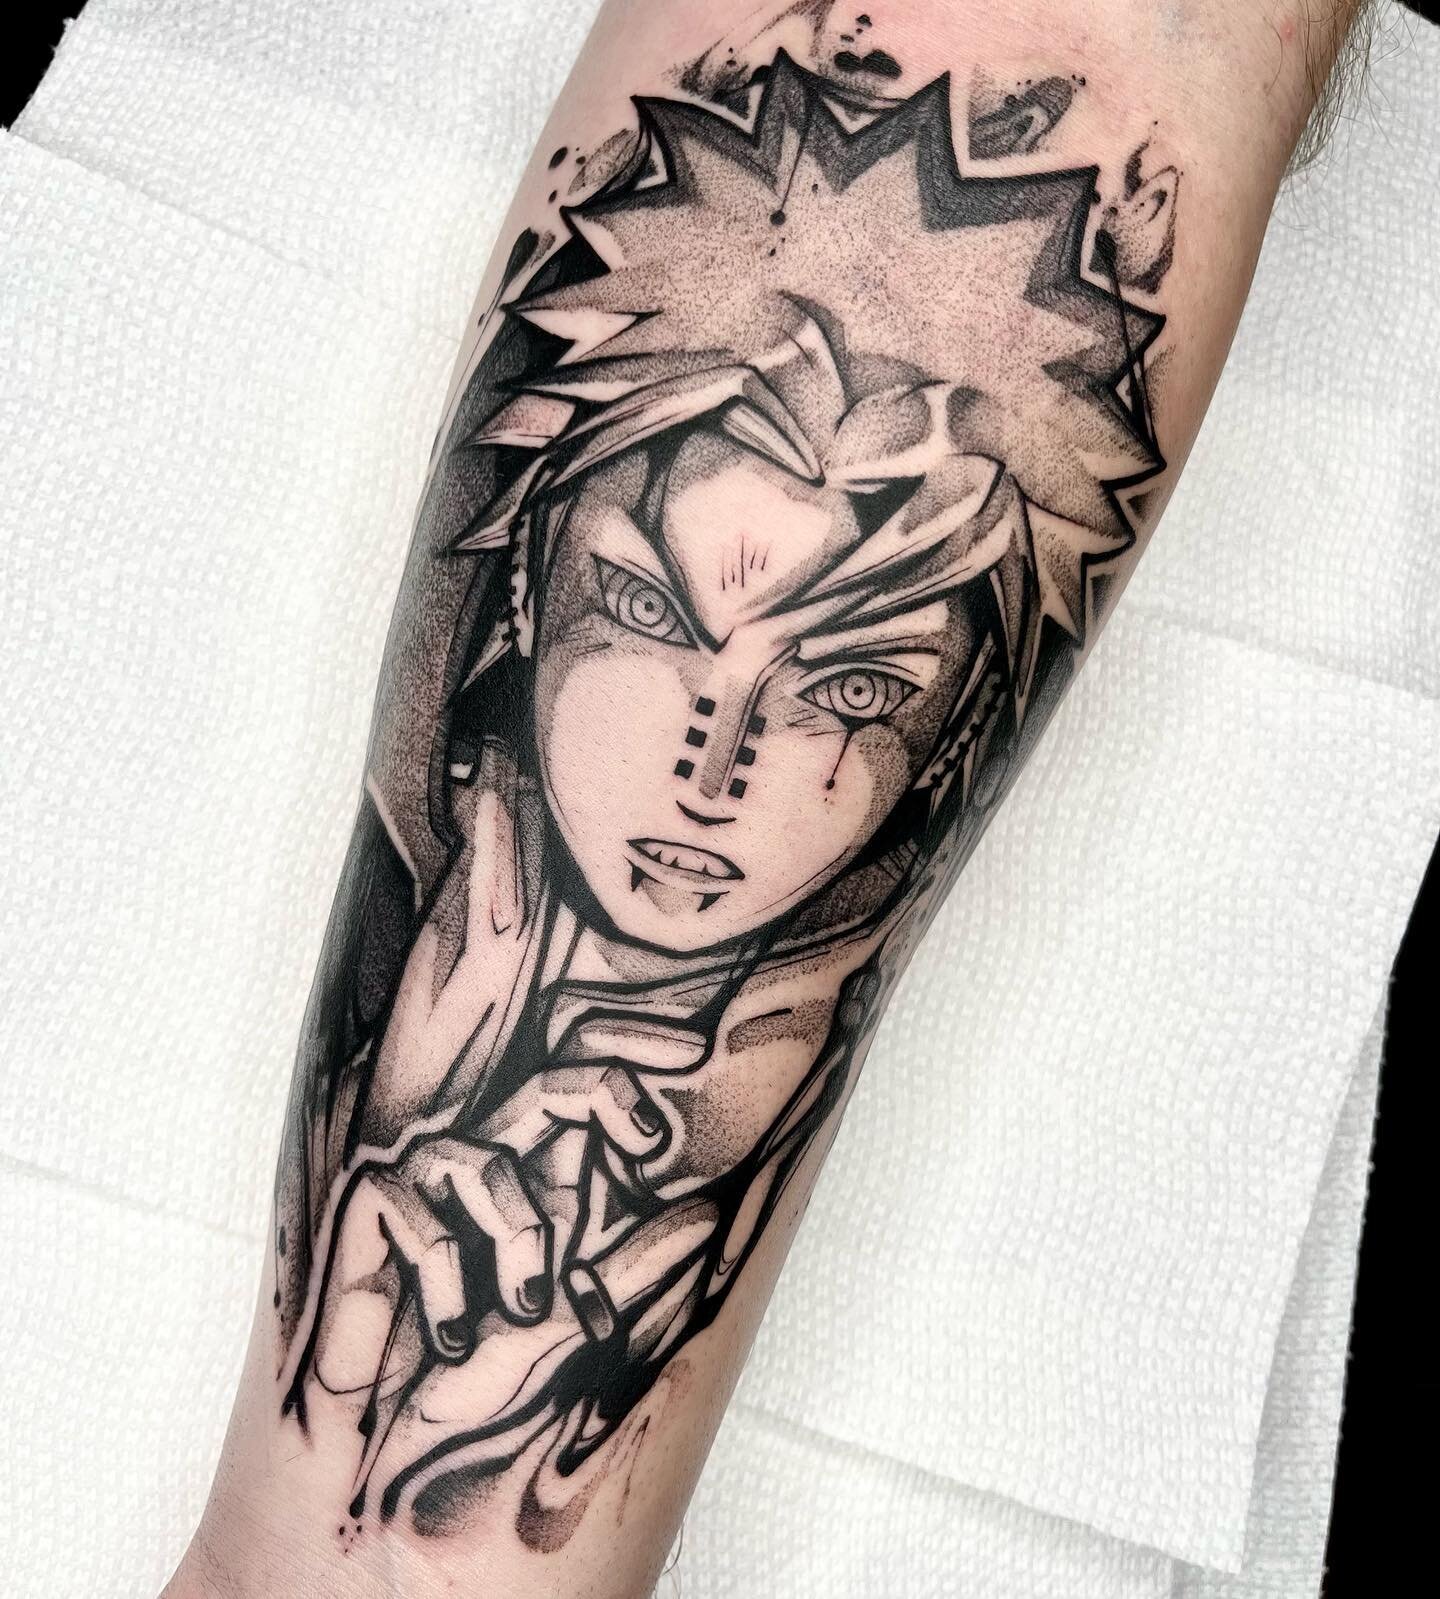 Pain from Naruto Shippuden (or at least the one most people recognize lol) thanks again @tylerlowman92 as always I appreciate you so much.
.
.
Naruto is one of my favorite shows to tattoo from, so if you&rsquo;re considering one of it&rsquo;s charact